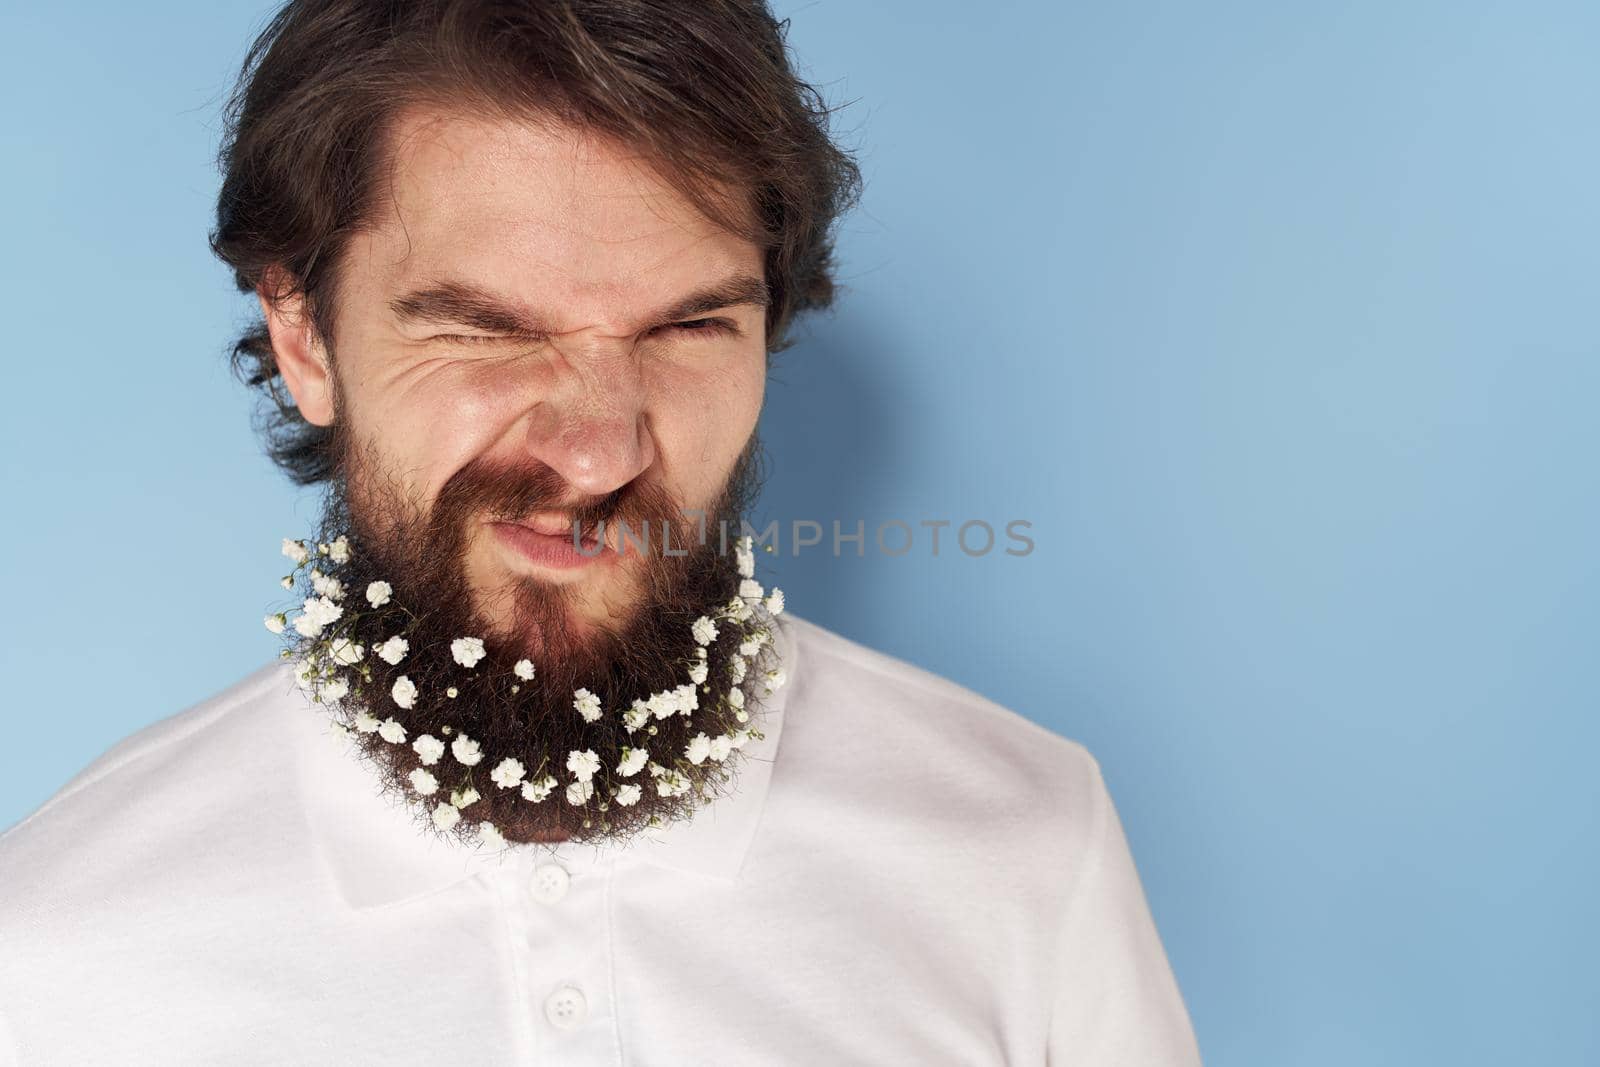 Cute man beard flowers decoration close-up isolated background by SHOTPRIME